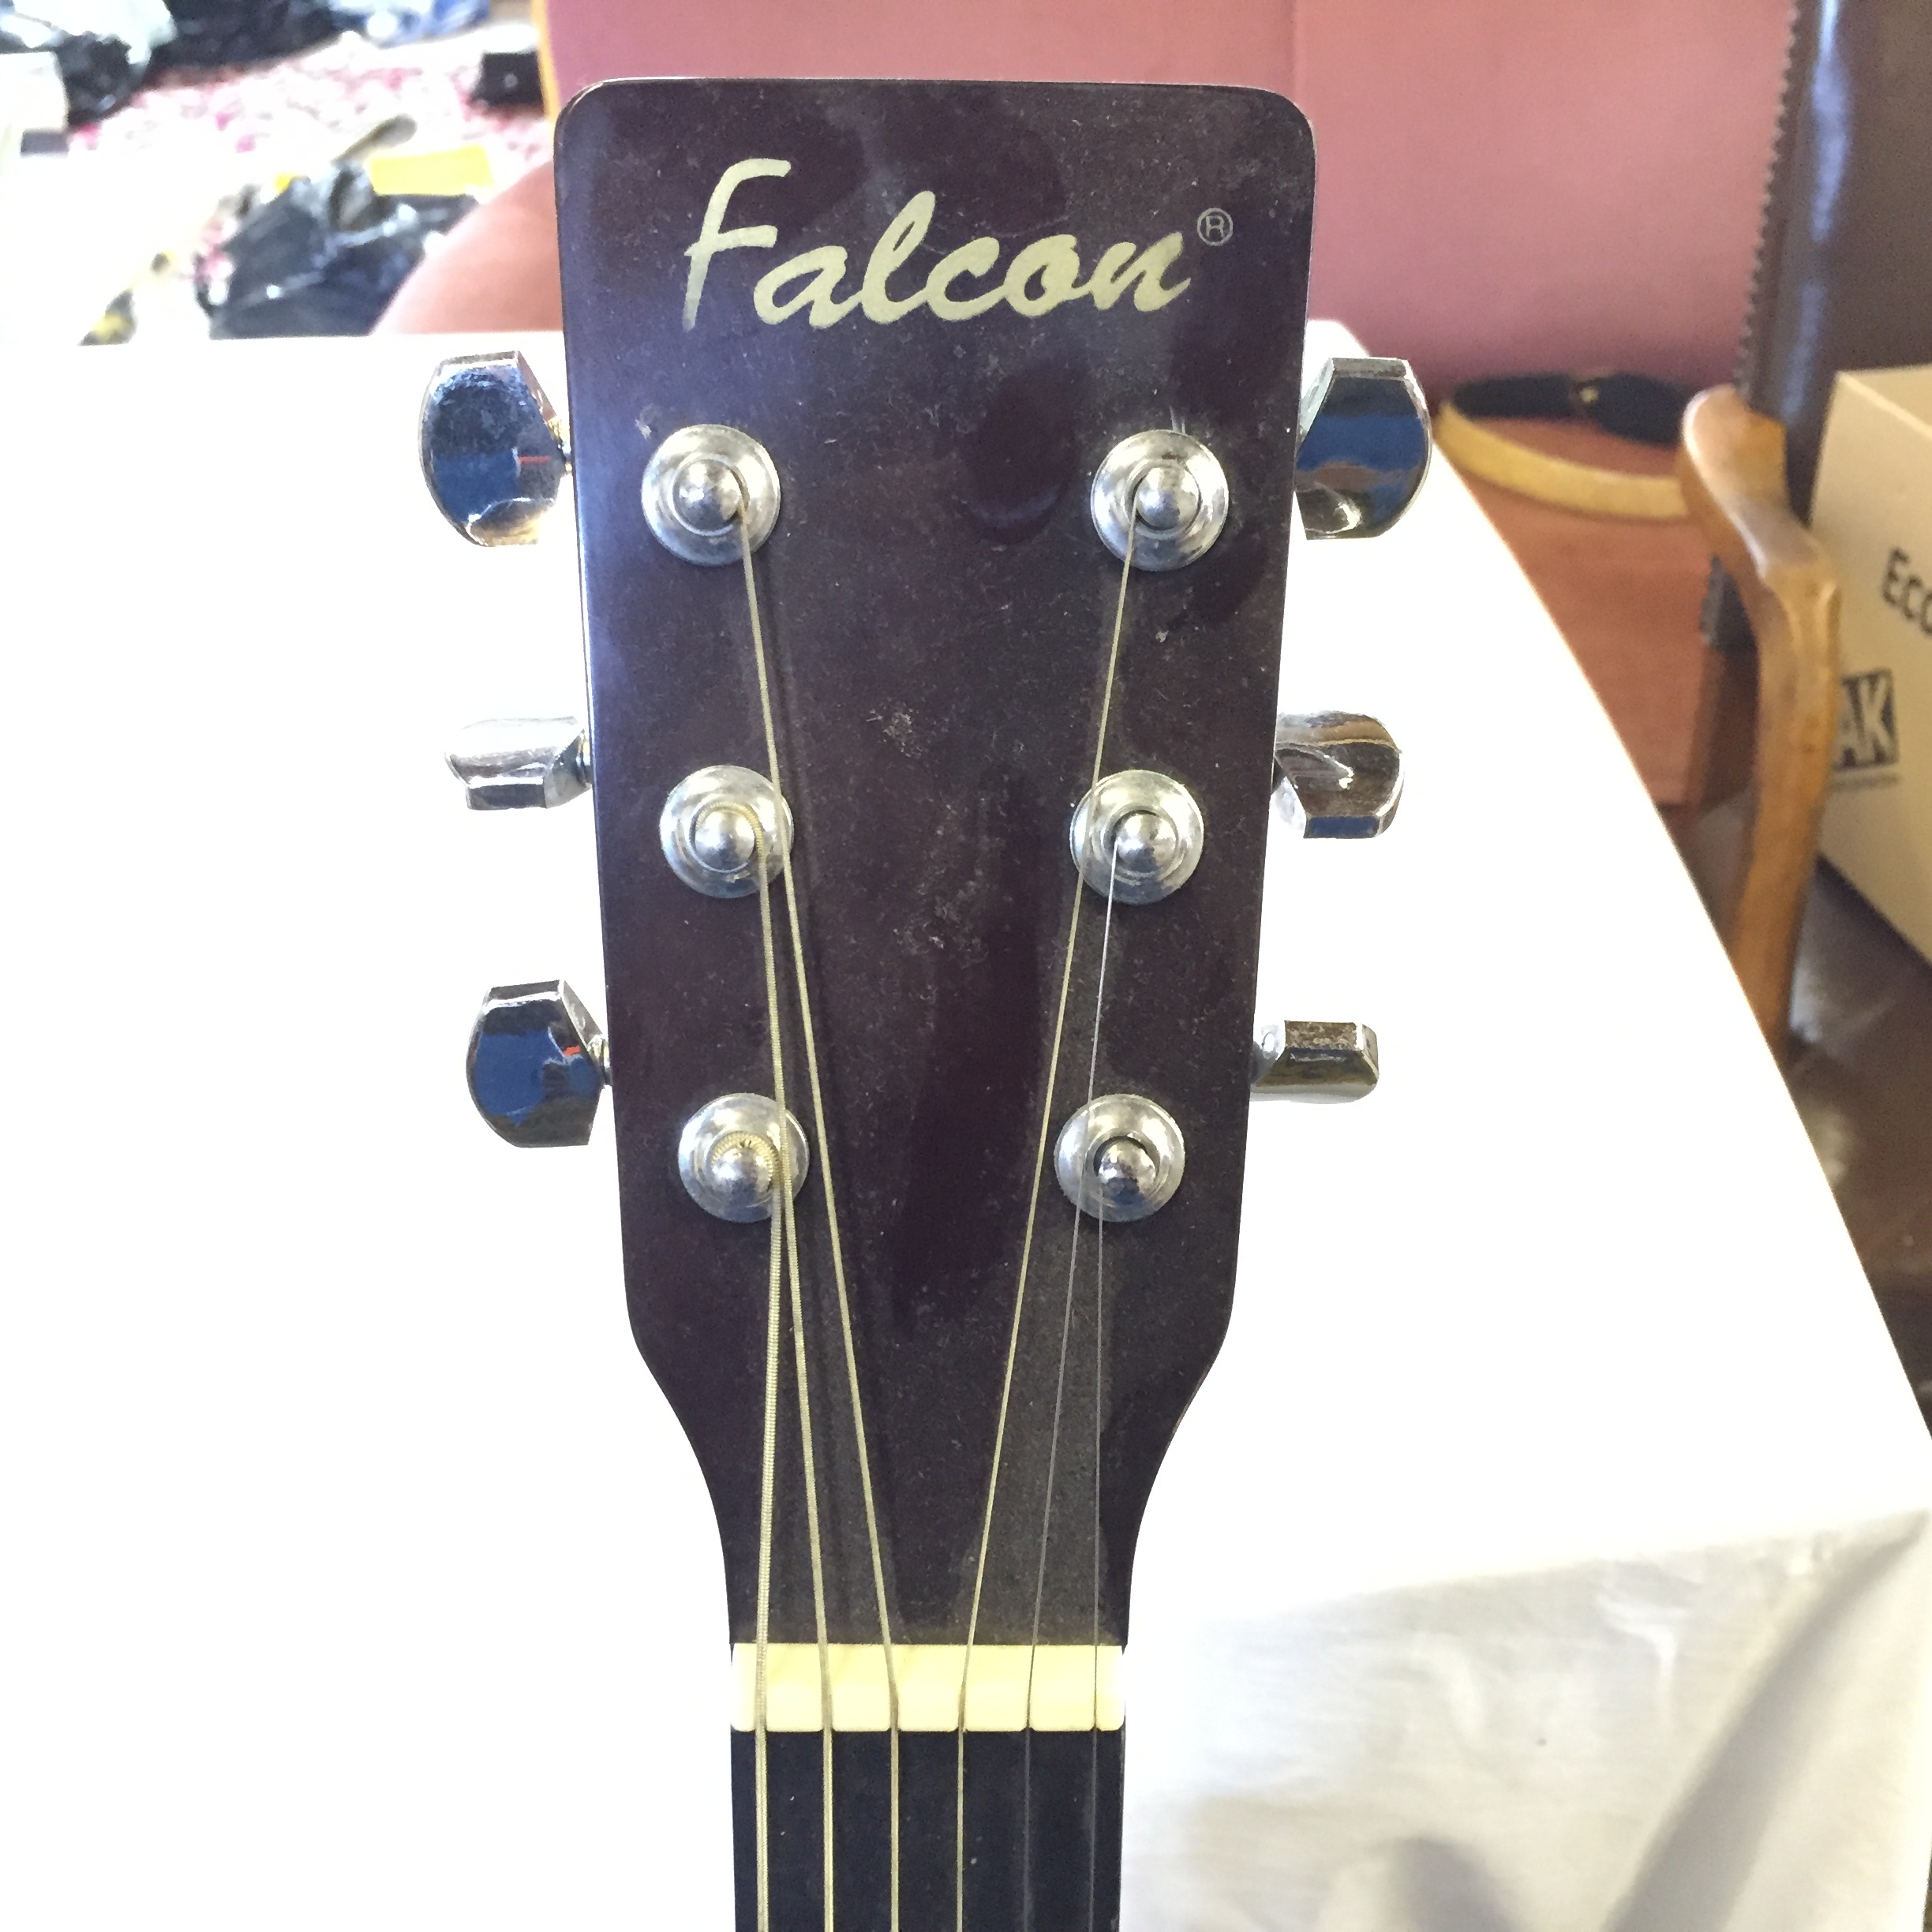 A Falcon steel string guitar on stand. - Image 2 of 5